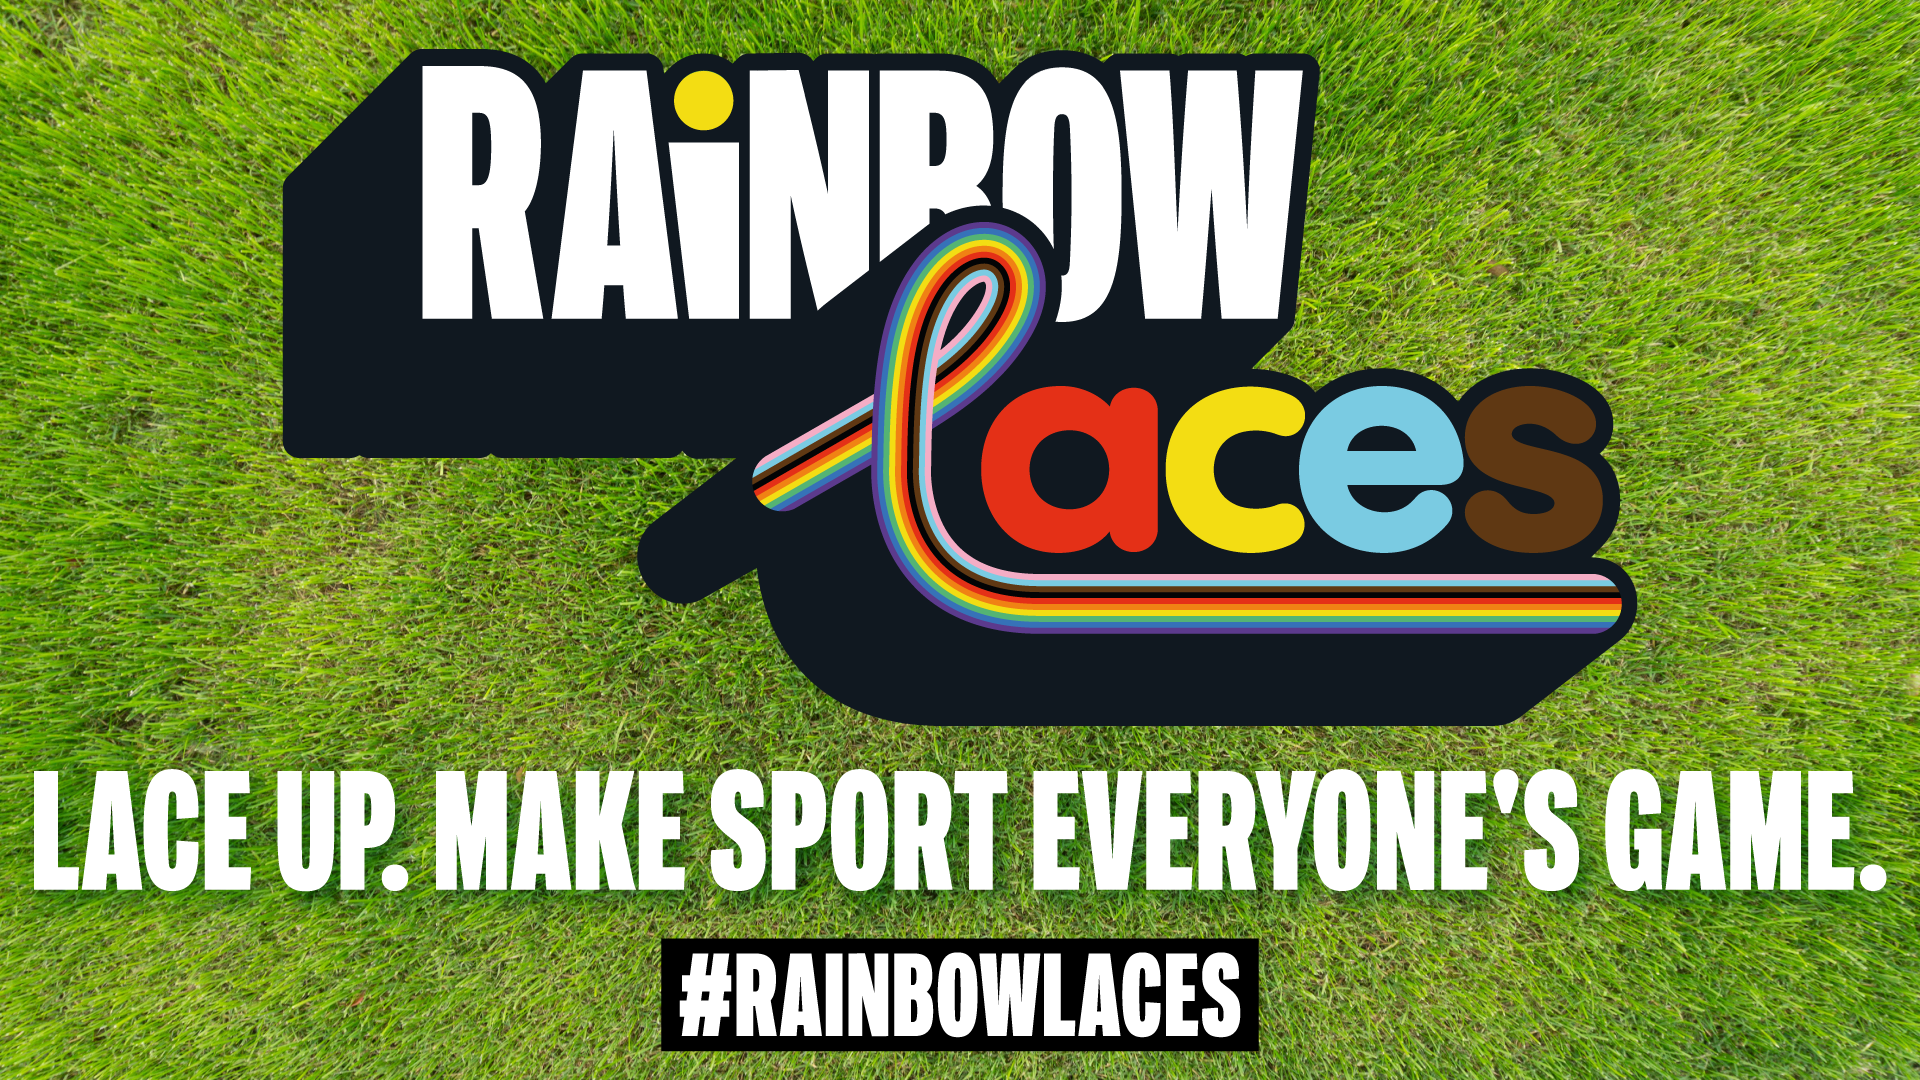 Rainbow Laces graphic. The wording rainbow laces is in front of a grass background with the tagline "Lace up. Make sport everyone's game" underneath